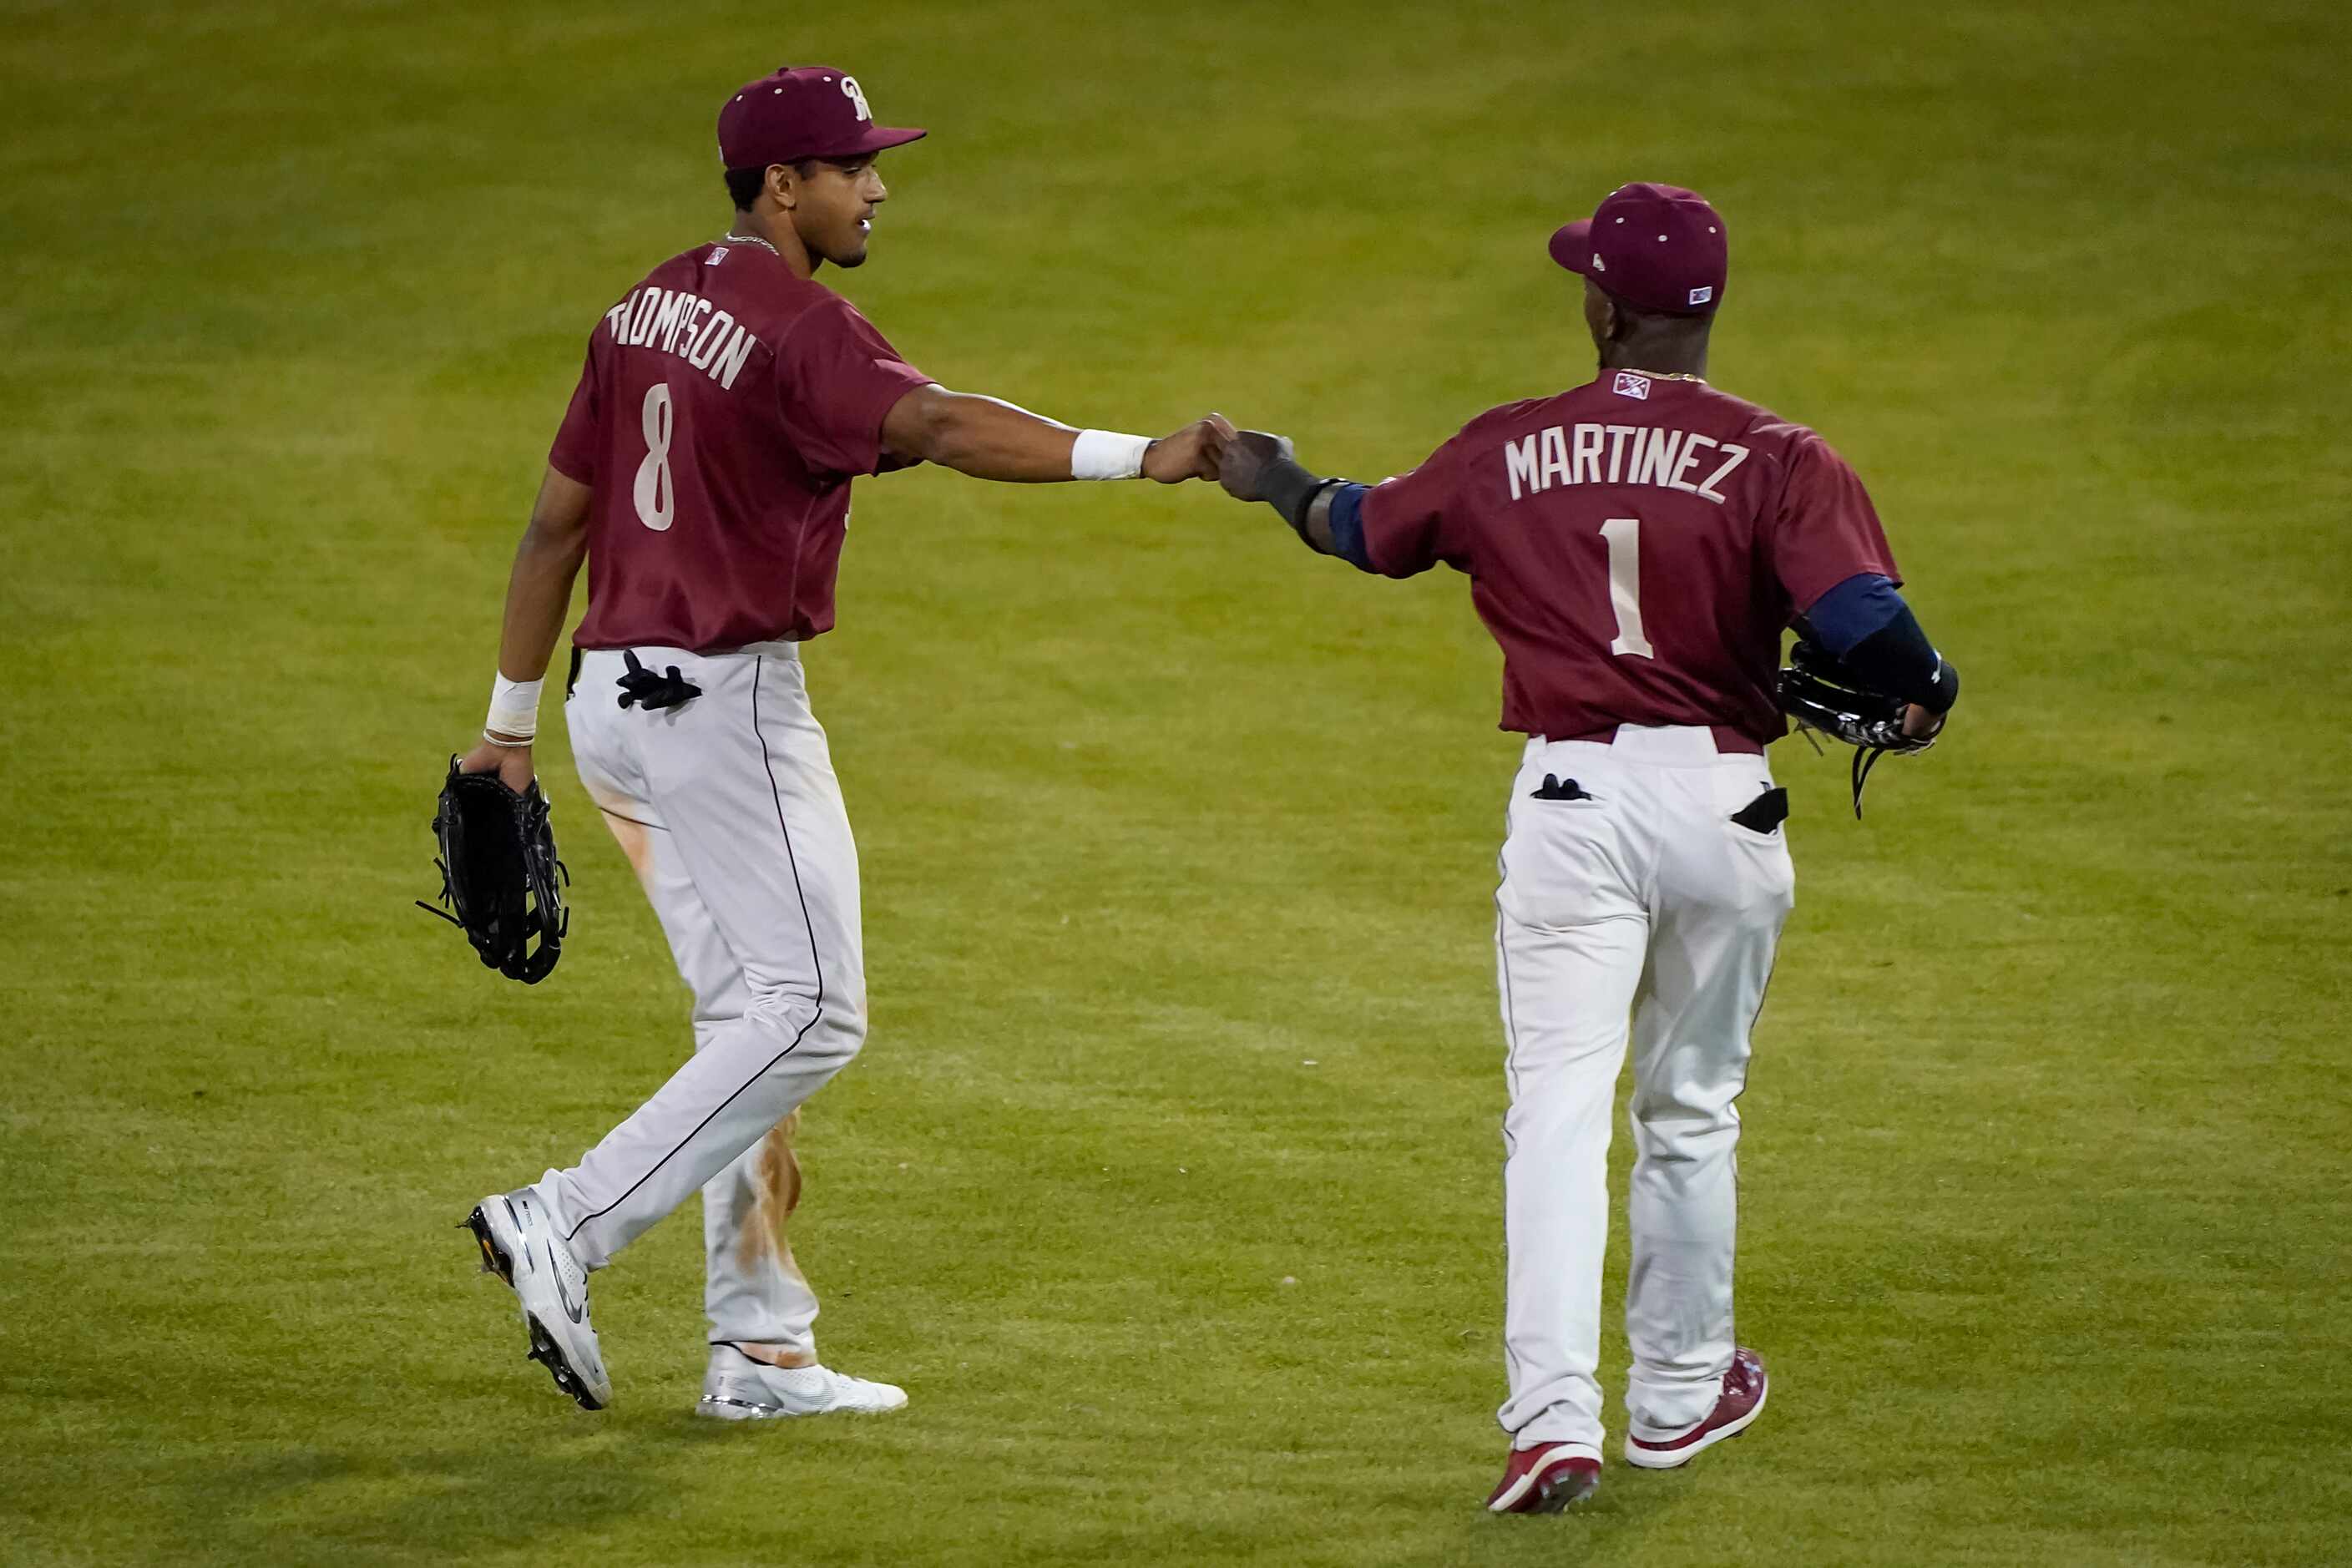 Frisco RoughRiders outfielders J.P. Martinez
and Bubba Thompson celebrate after a victory in...